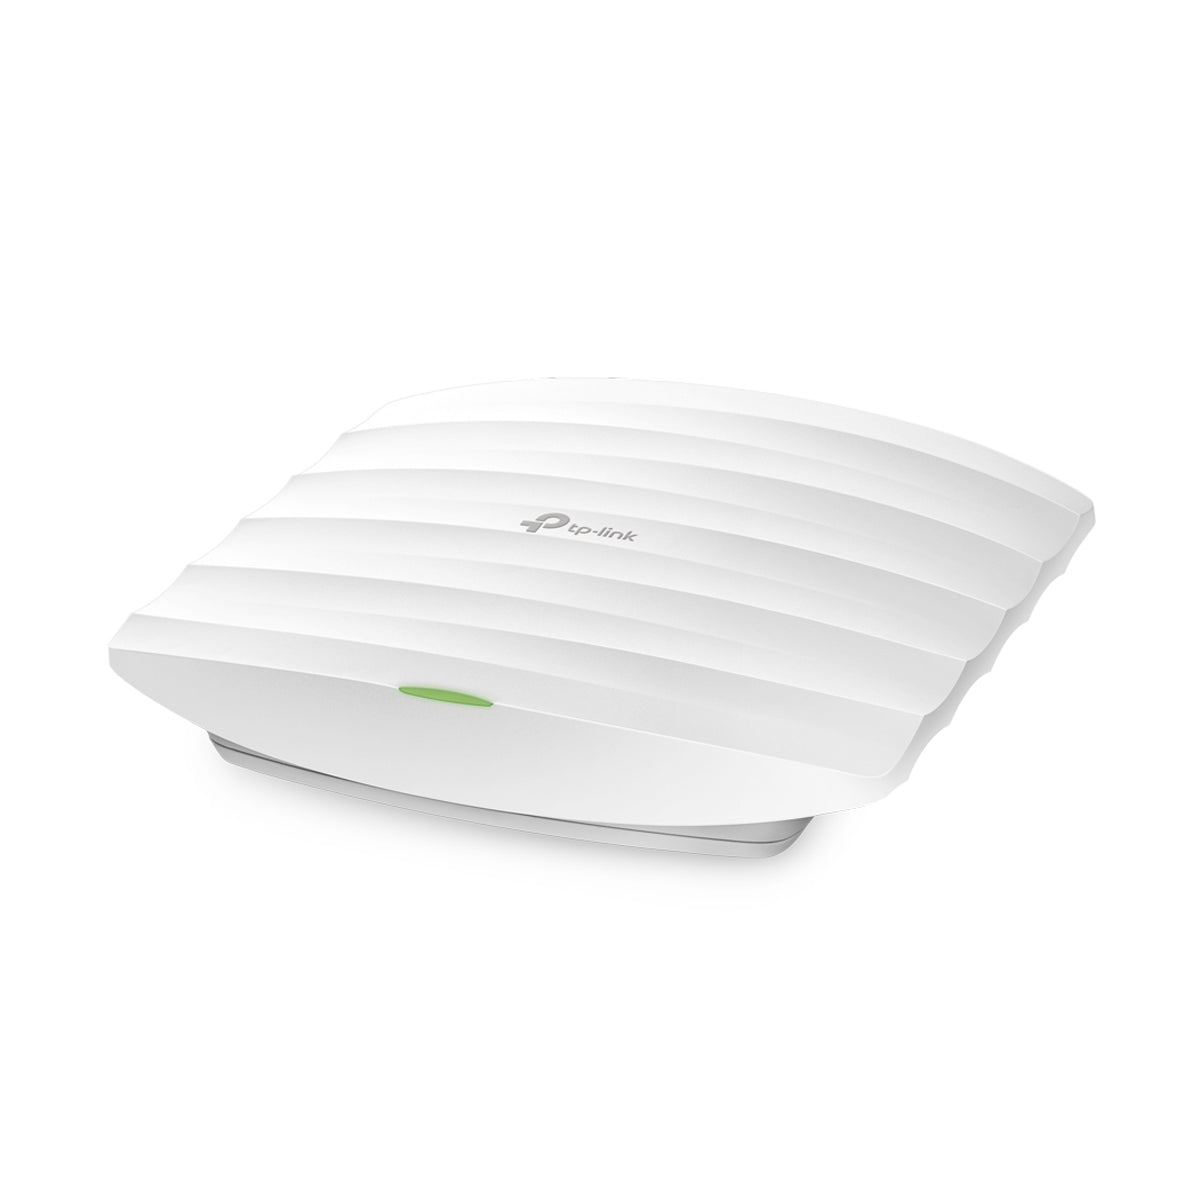 AC1350 Ceiling Mount POE Access Point